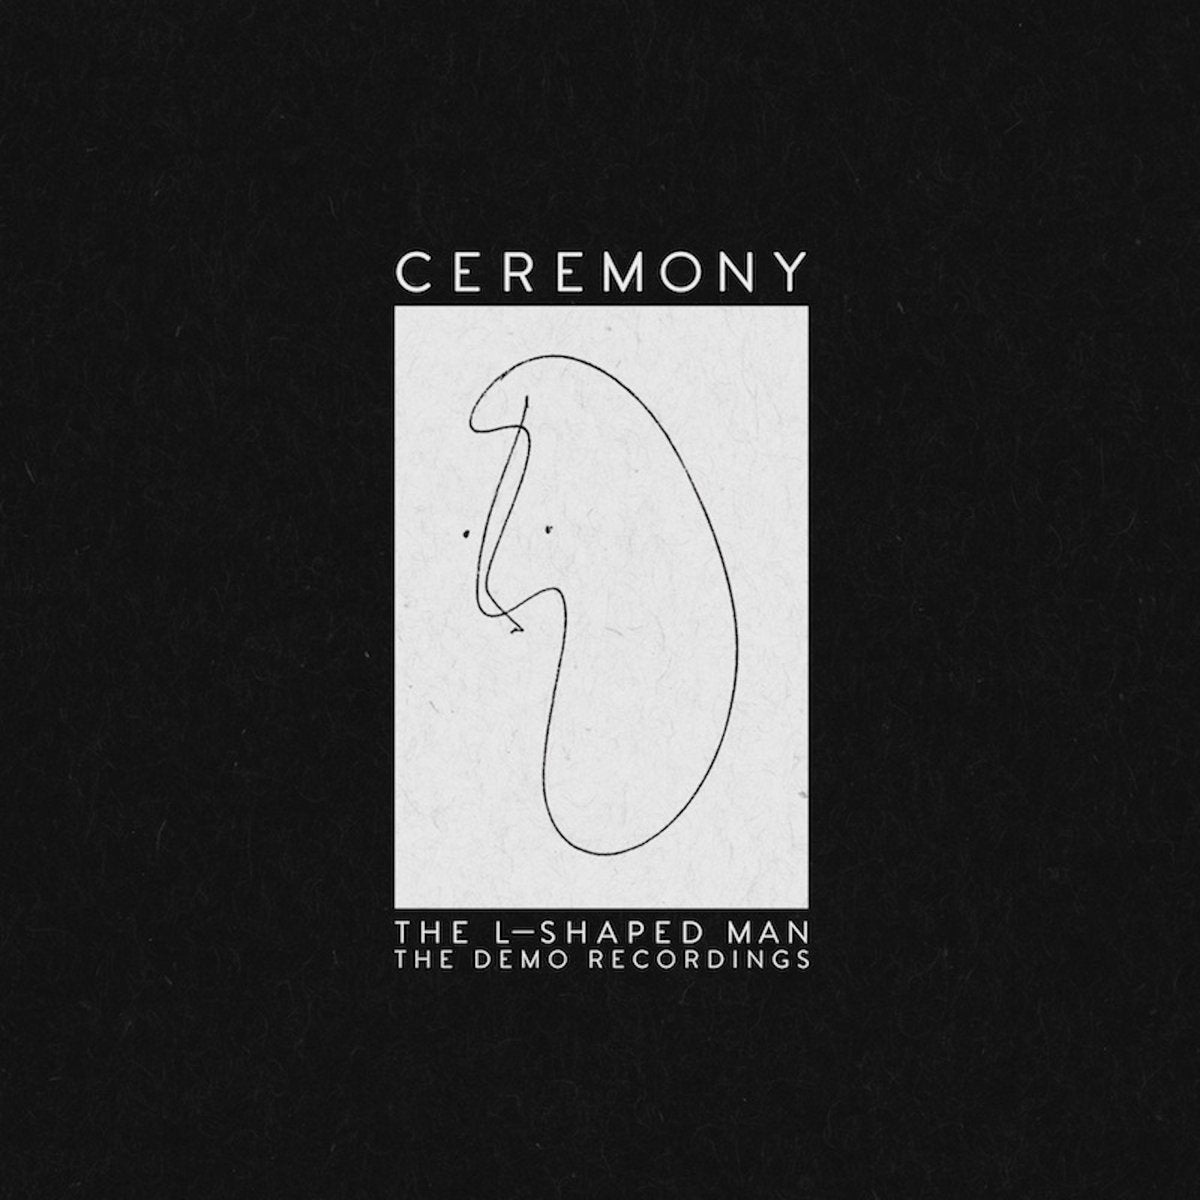 Ceremony - The L-Shaped Man: The Demo Recordings LP - Vinyl - First Letter Press